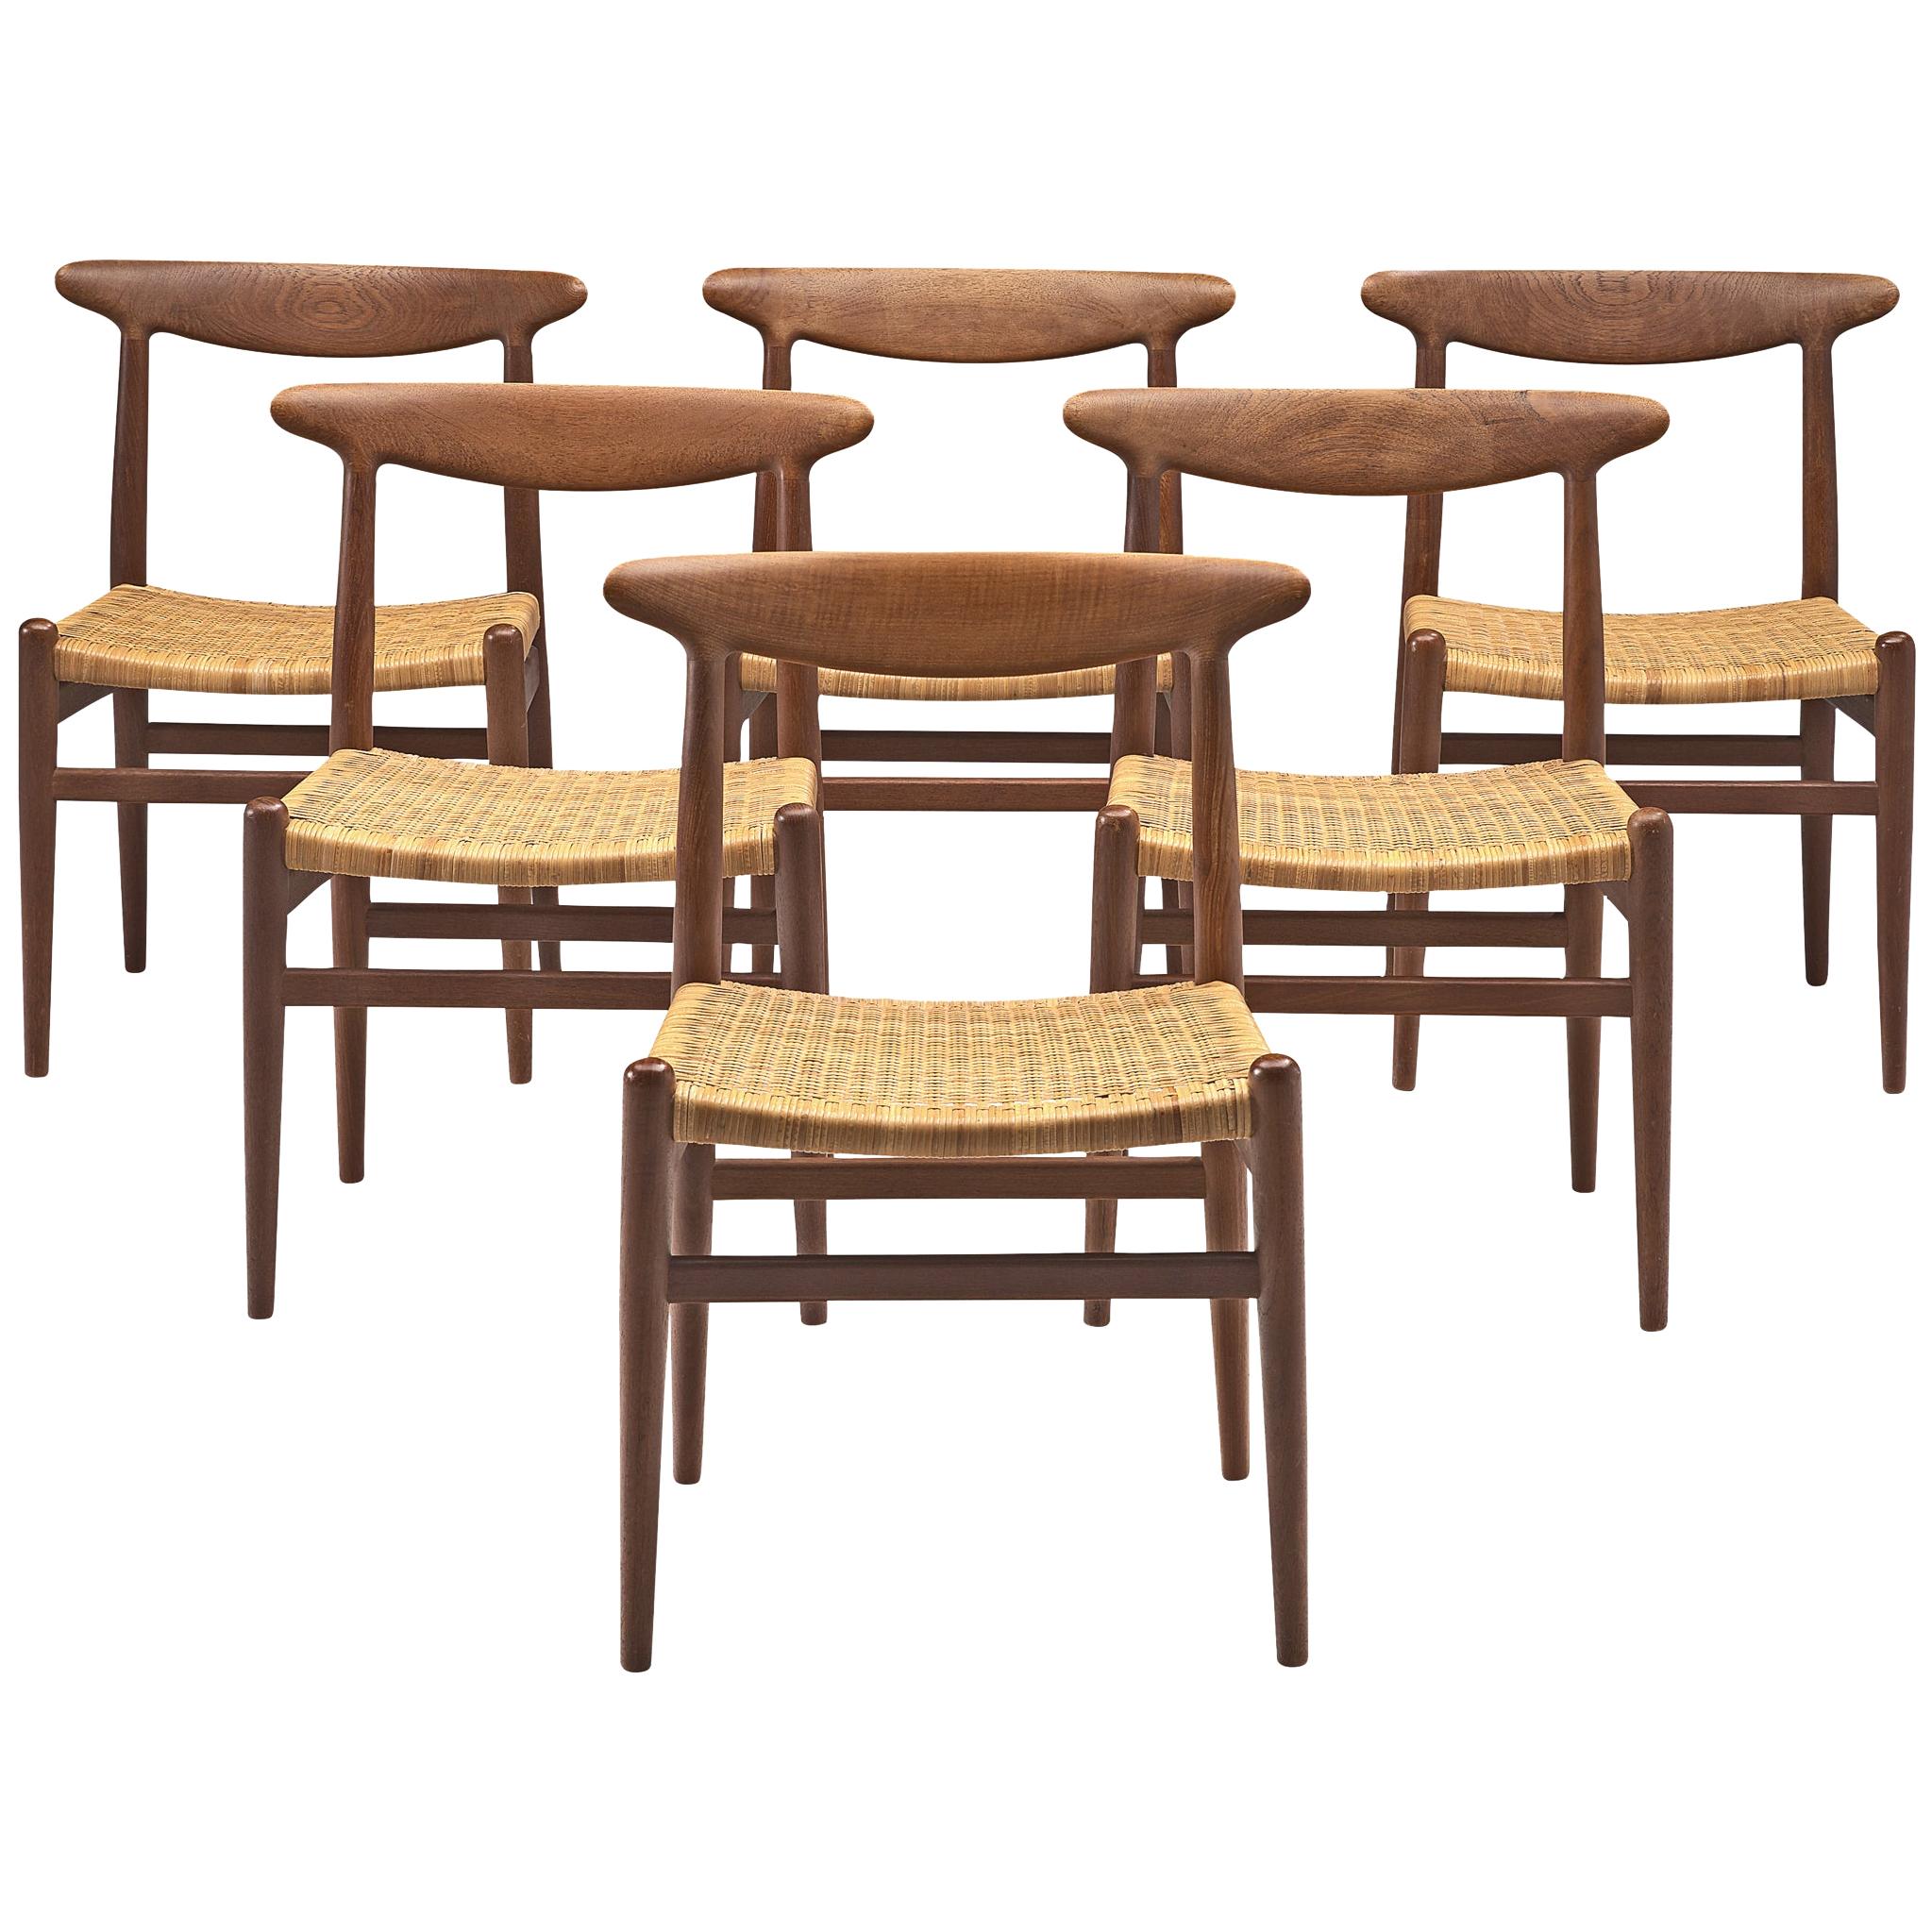 Hans J. Wegner "W2" Dining chairs with Wicker Seats